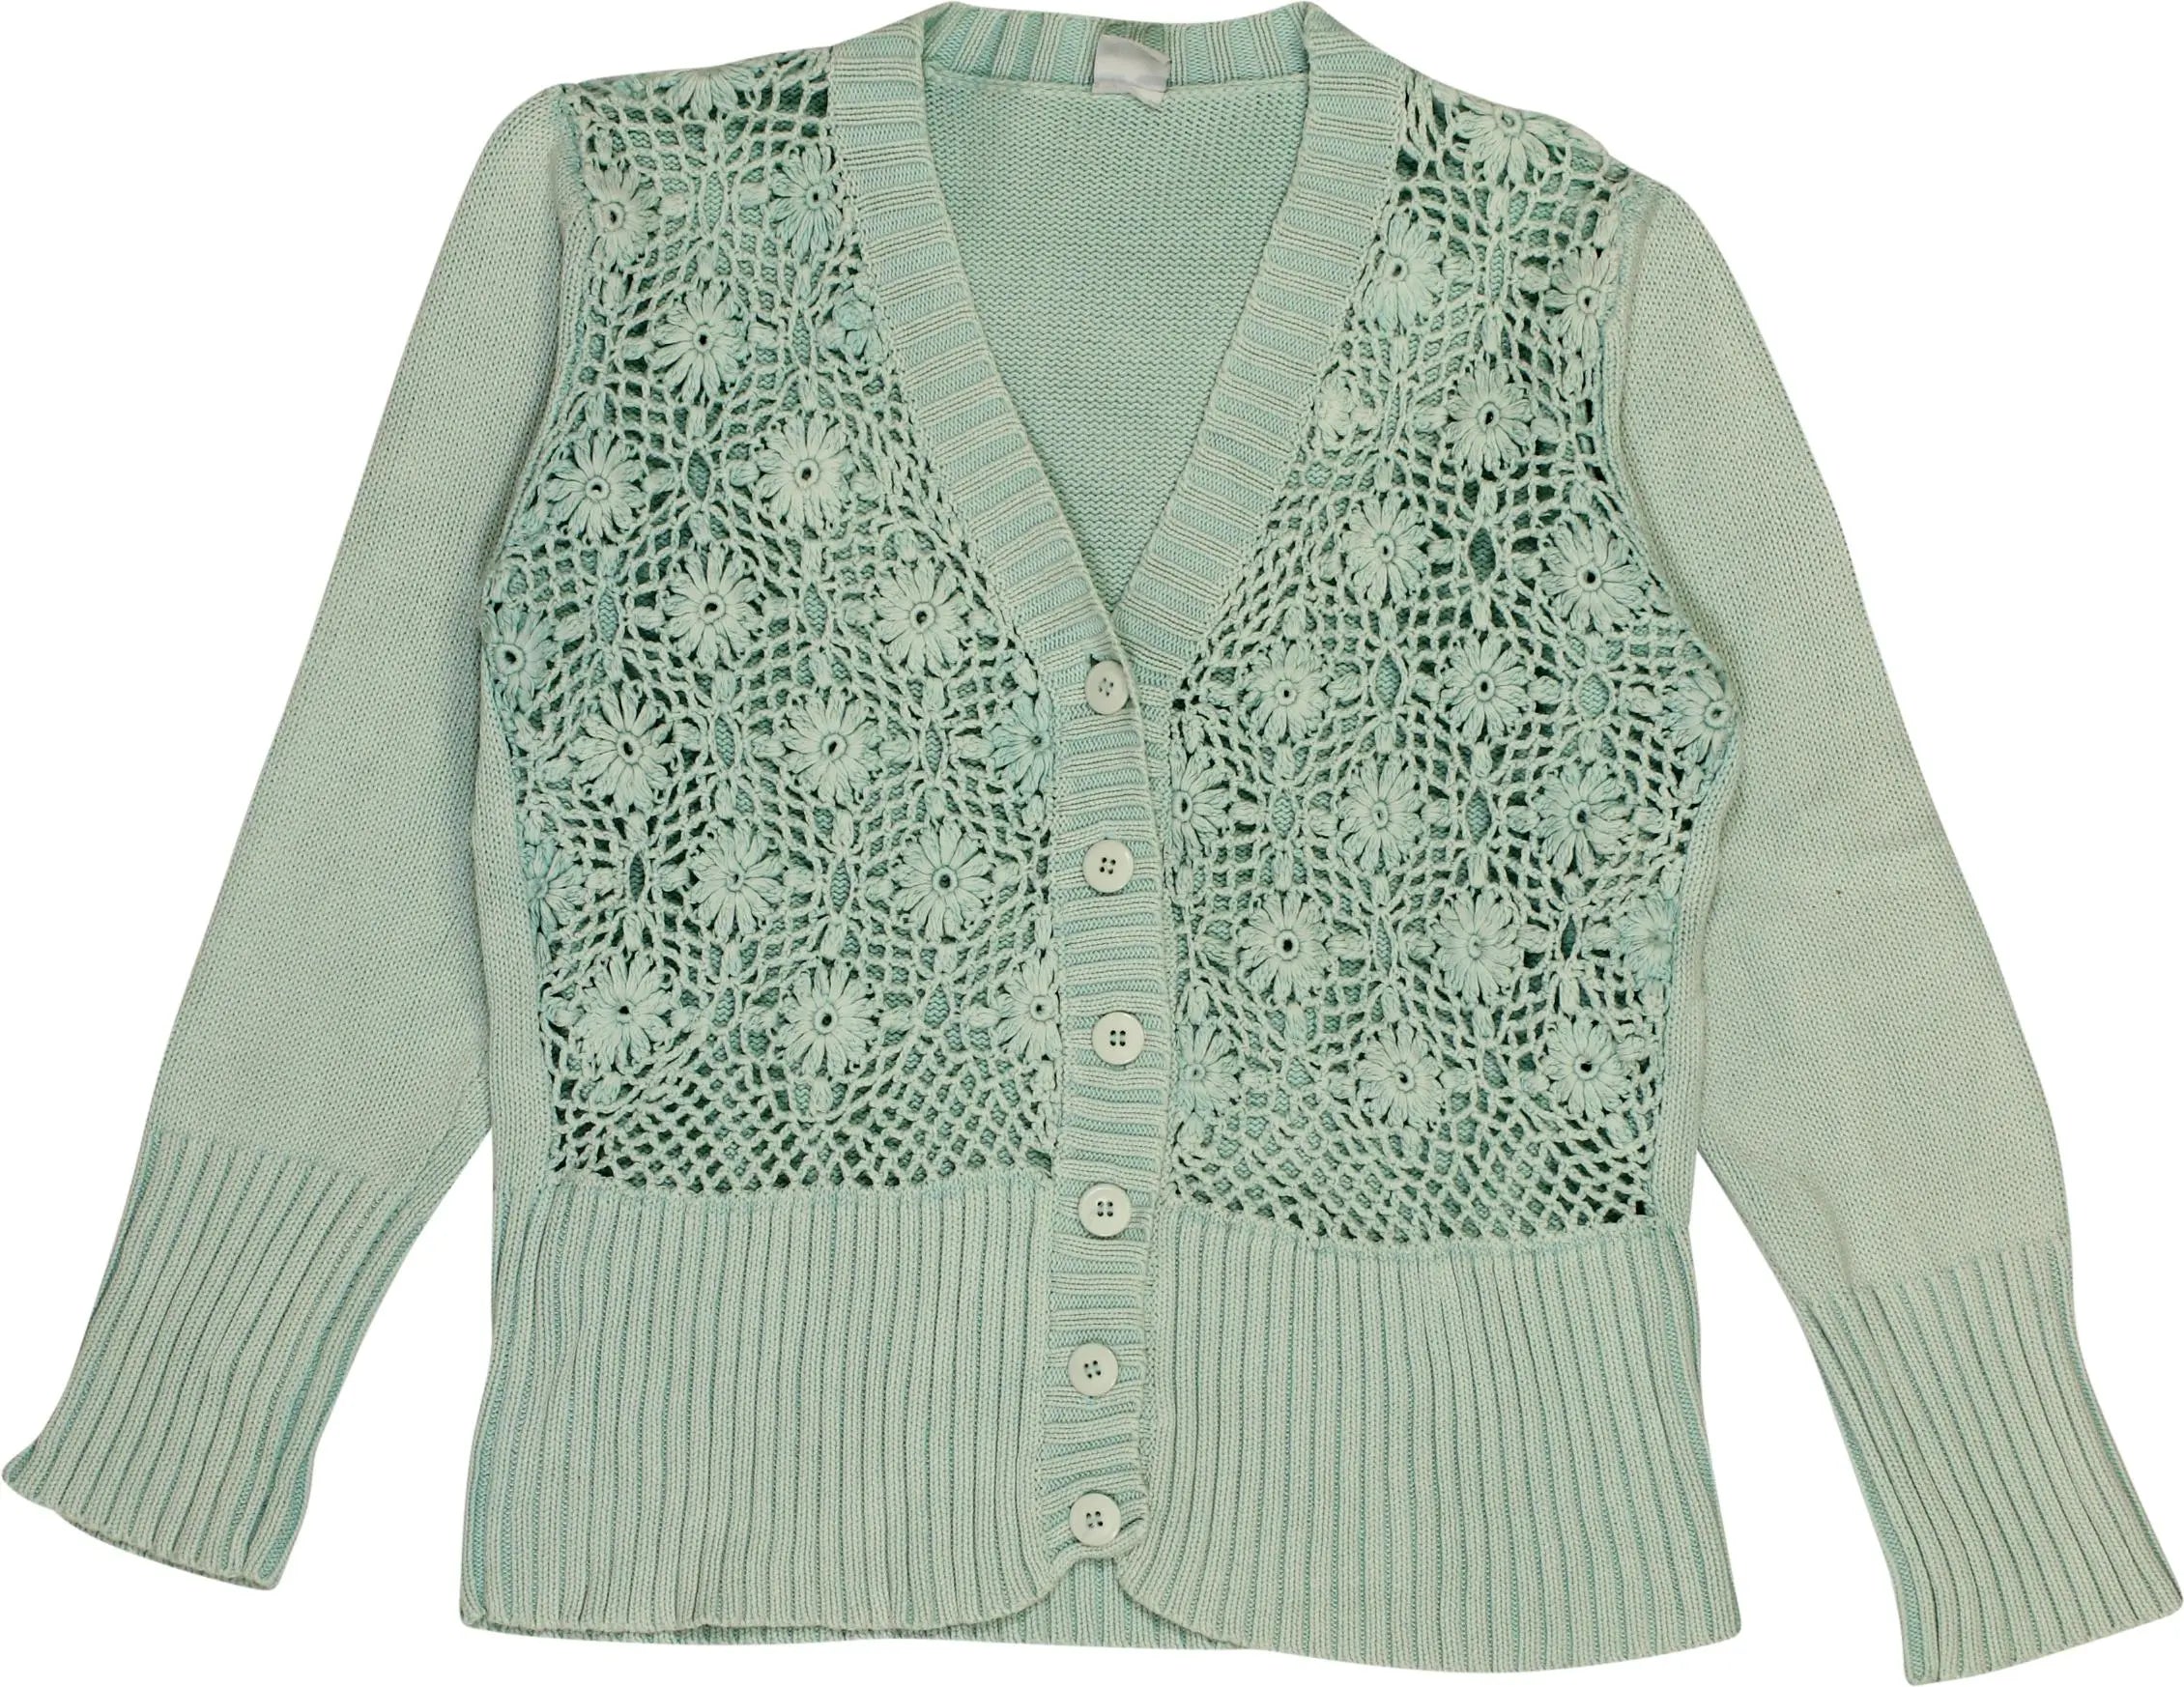 M&S - Crochet Cardigan- ThriftTale.com - Vintage and second handclothing